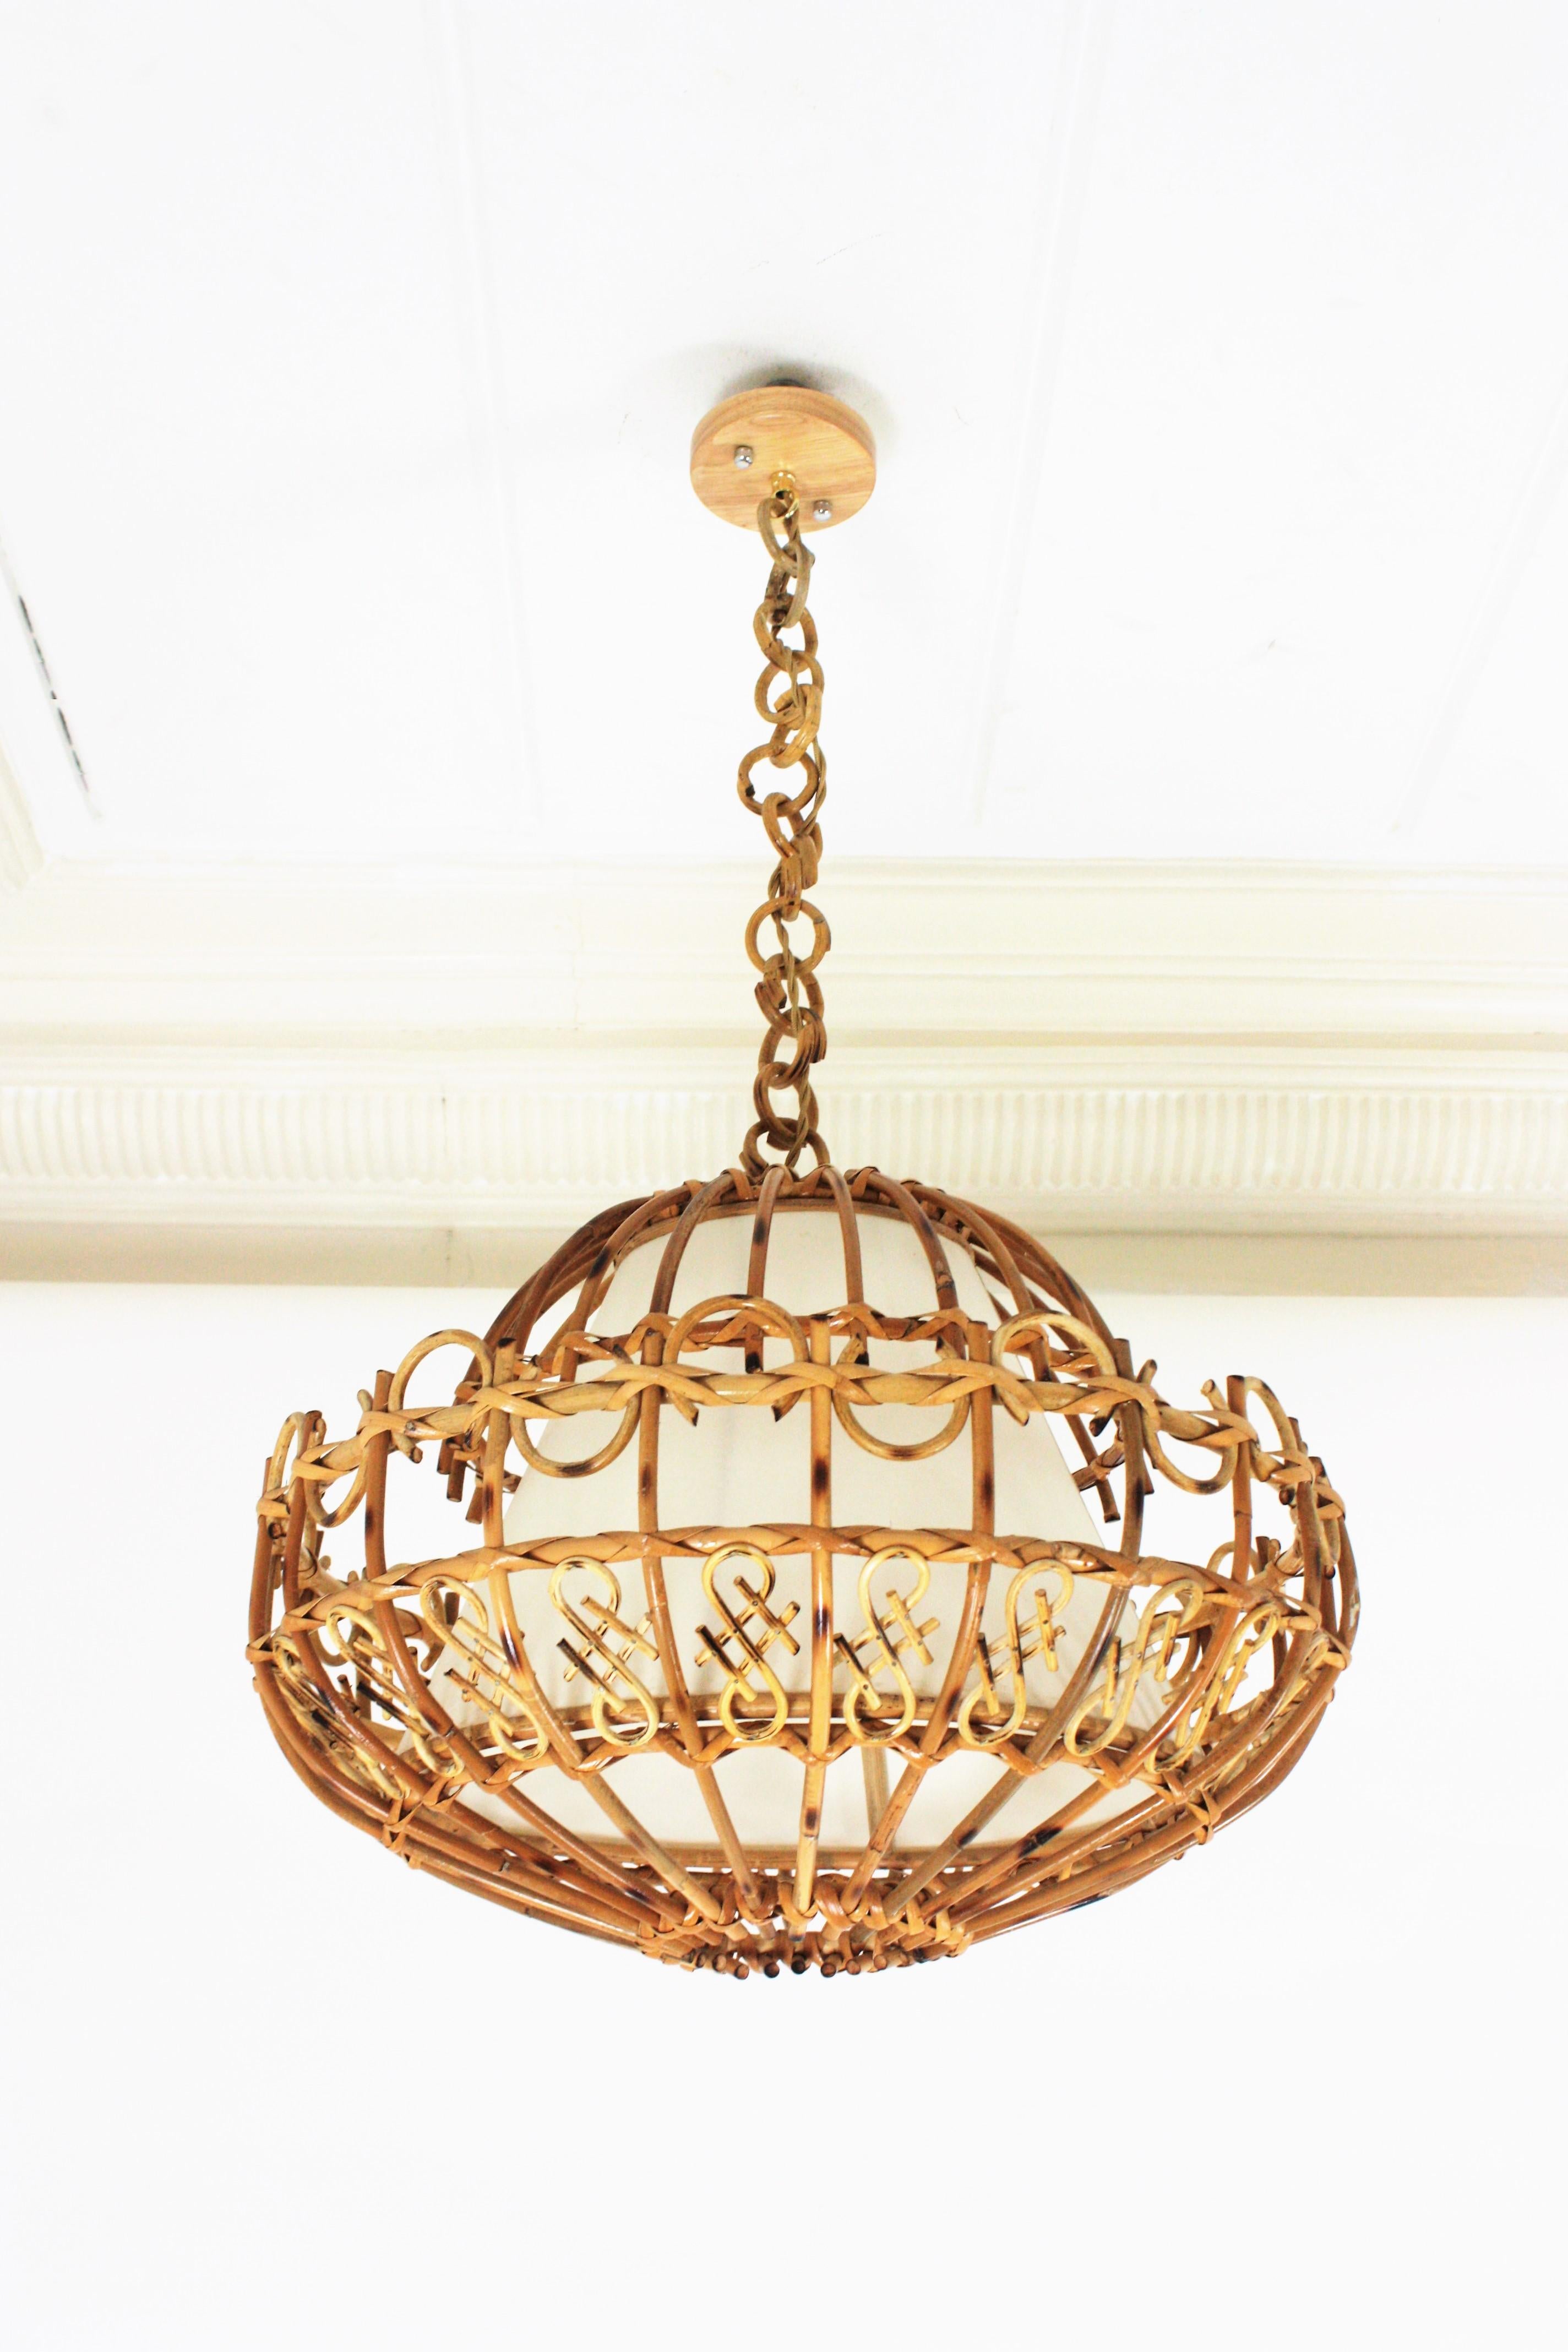 A cool handcrafted rattan large ceiling pendant hanging light with chinoiserie accents, Spain, 1960s.
This large lantern has an eye-catching design featuring a semi-spherical rattan structure decorated by chinoiserie accents and semi rings